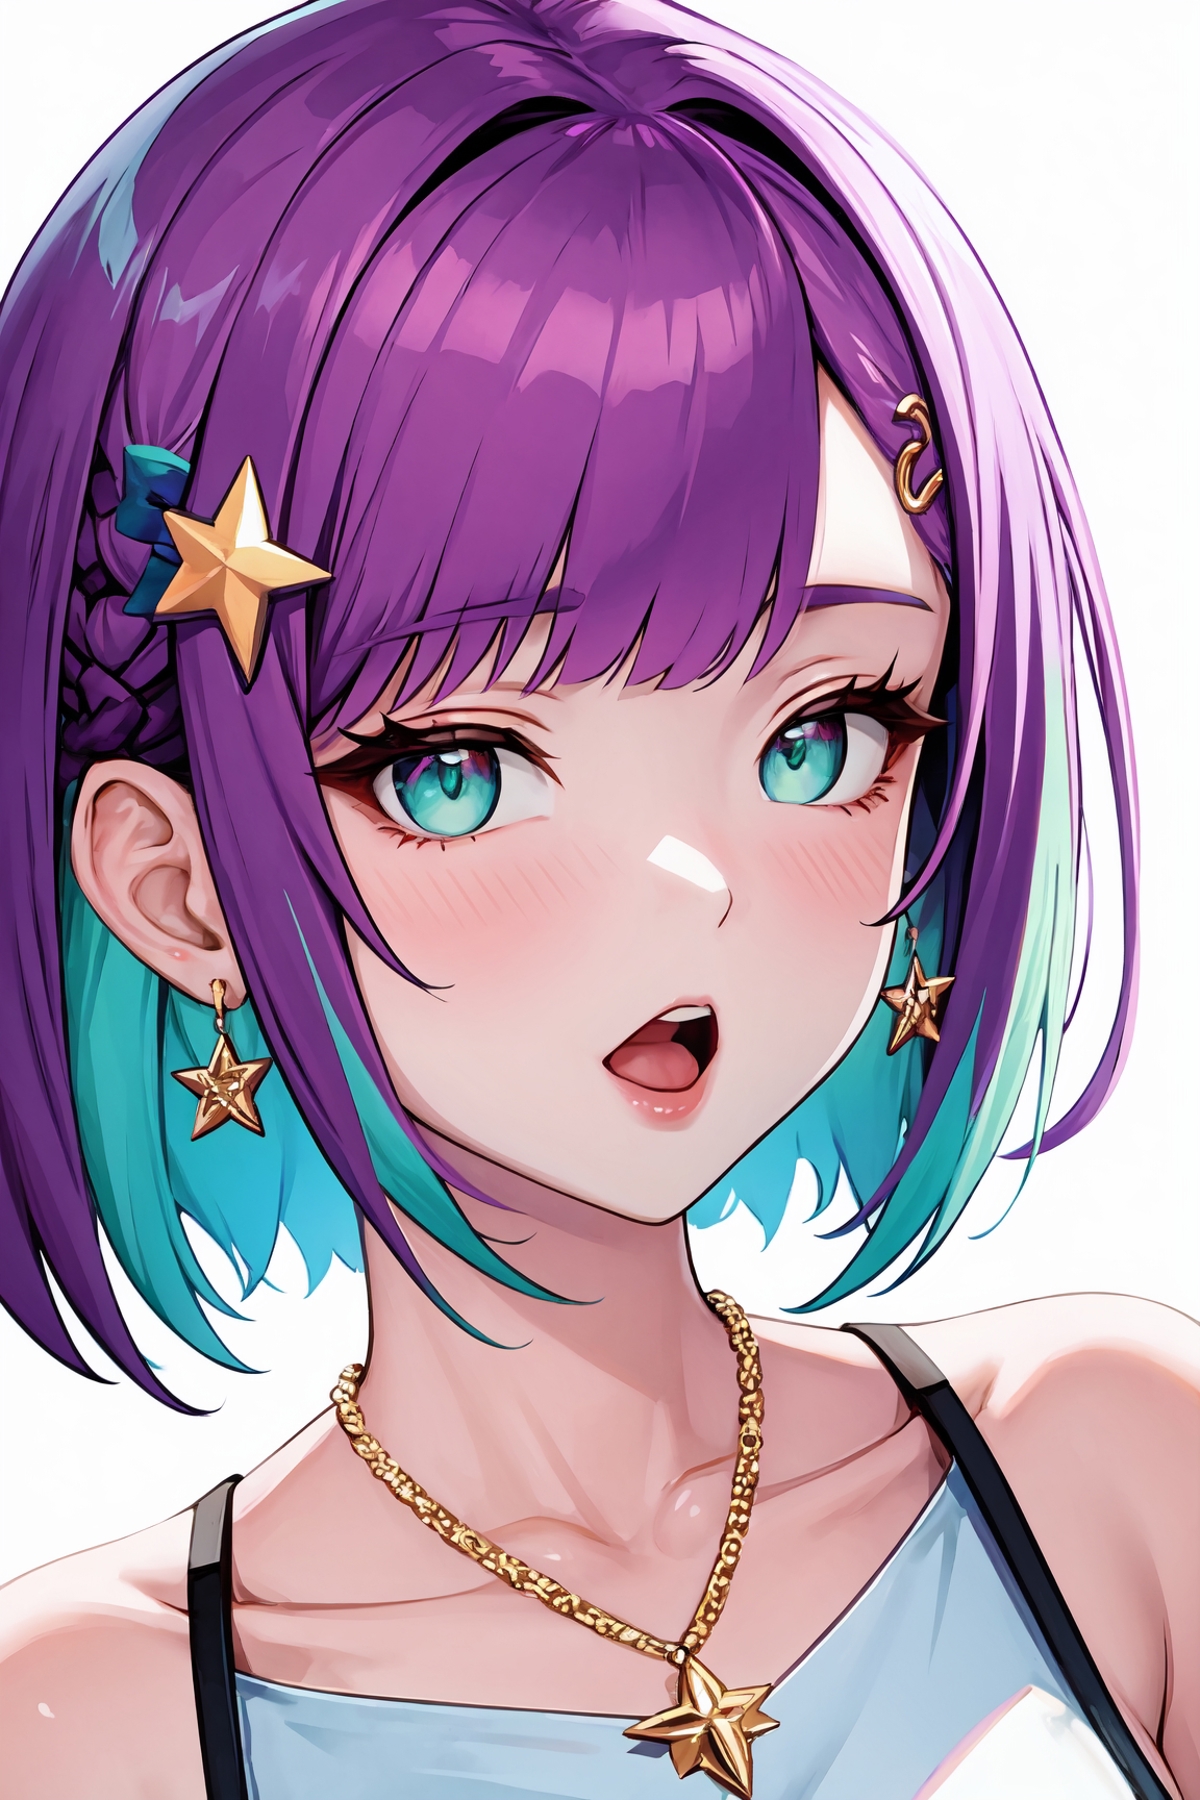 Anime girl with purple hair wearing a necklace and earrings.